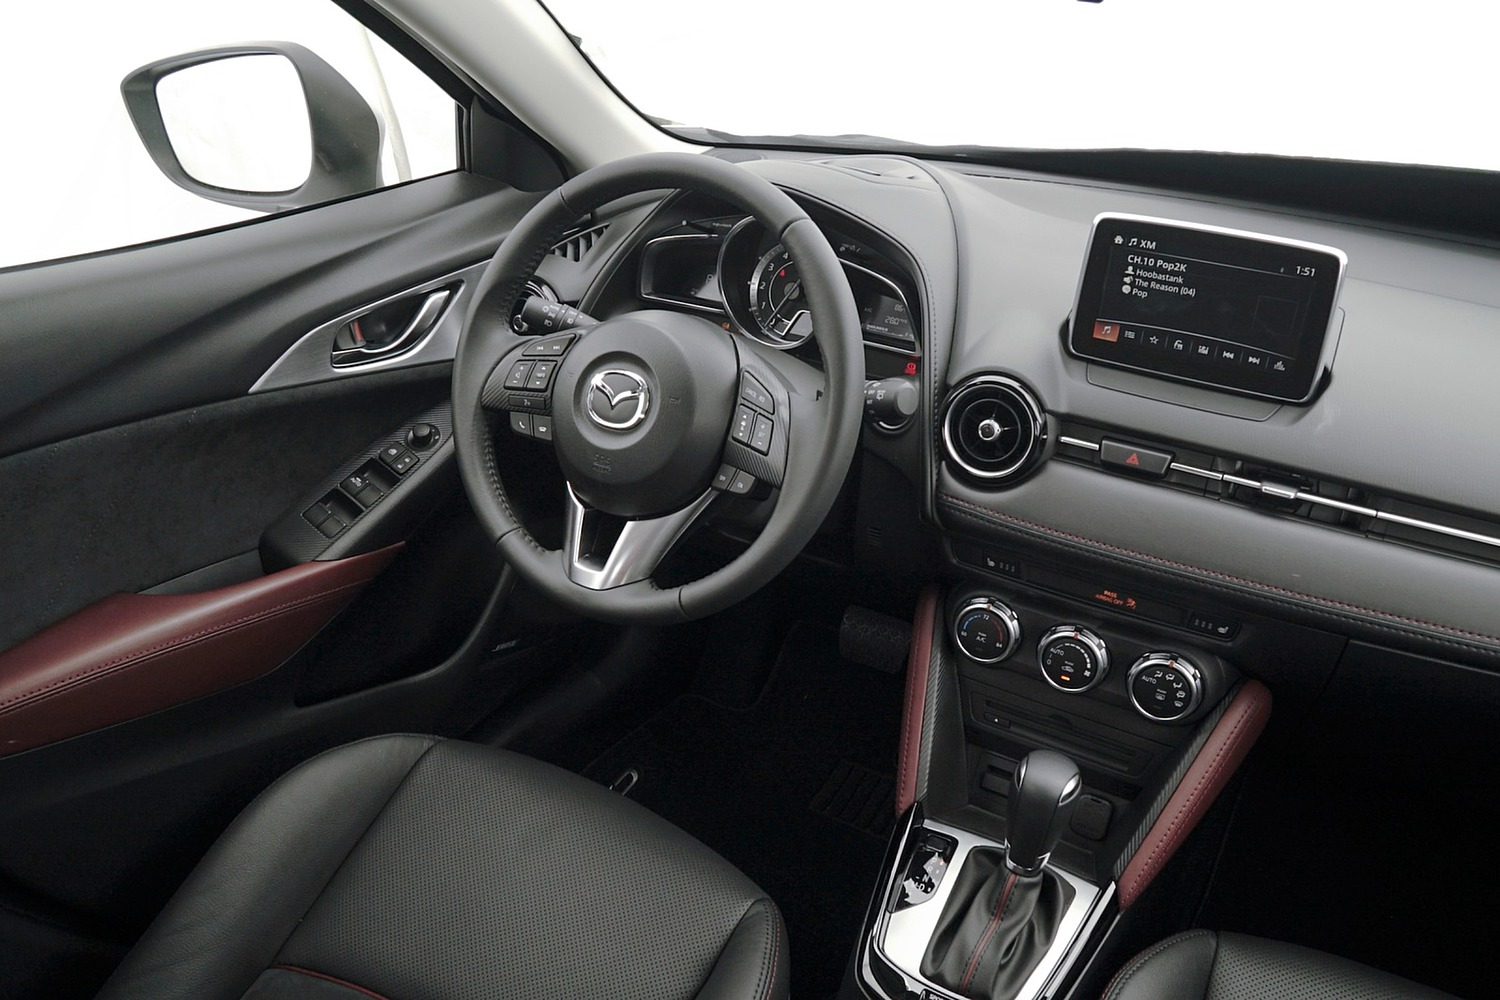 Mazda CX-3 Grand Touring 4dr SUV Steering Wheel Detail (2016 model year shown)